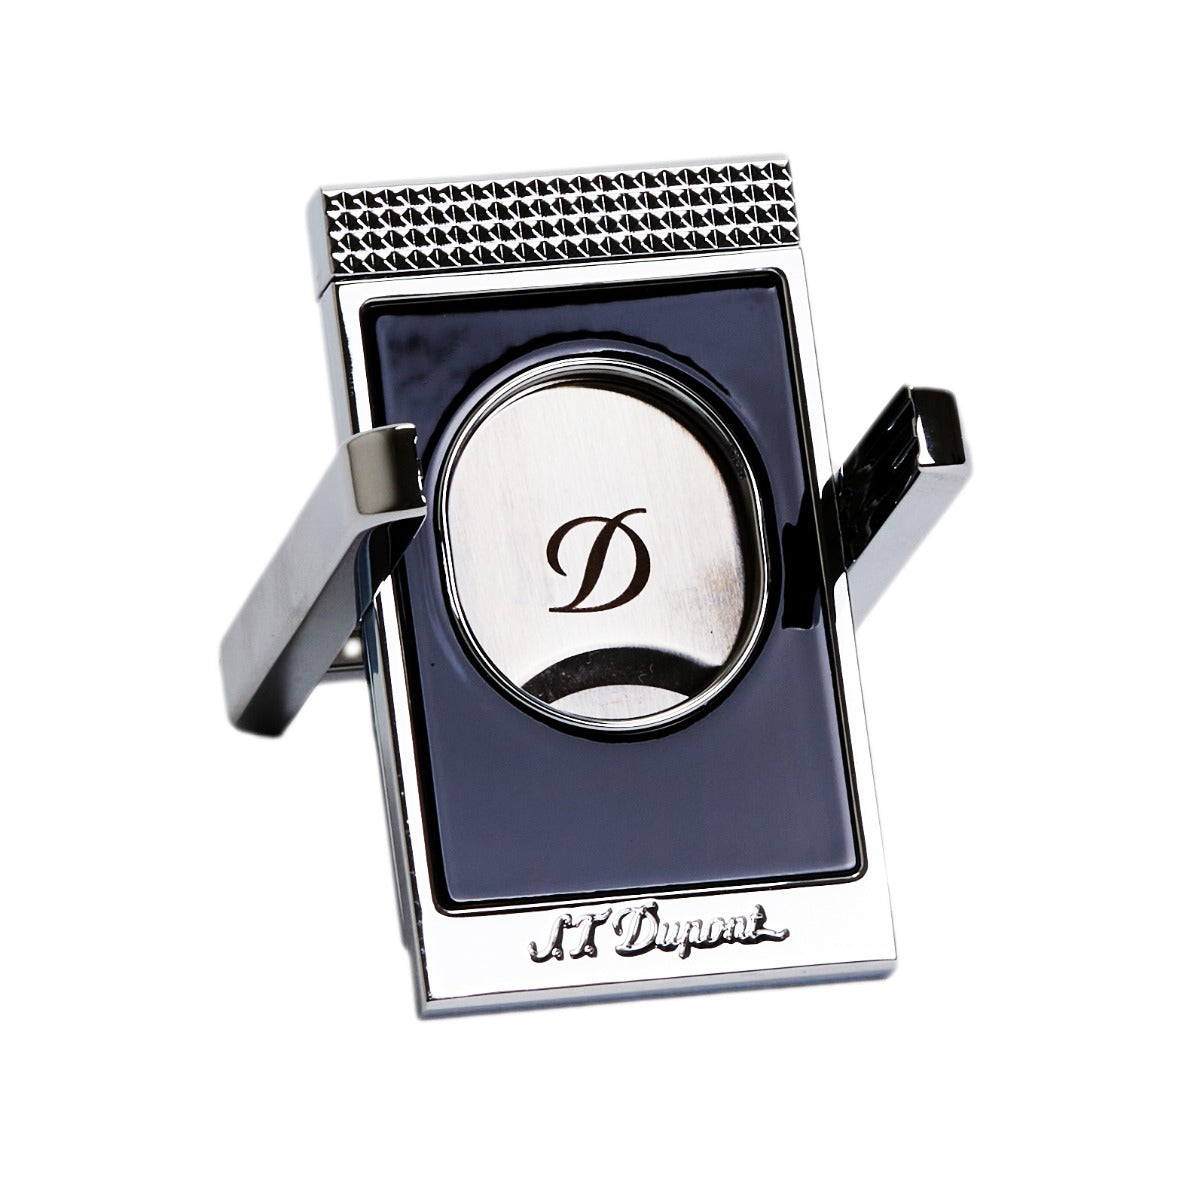 A S.T. Dupont Black & Chrome Cigar Cutter Stand with lacquer coating.